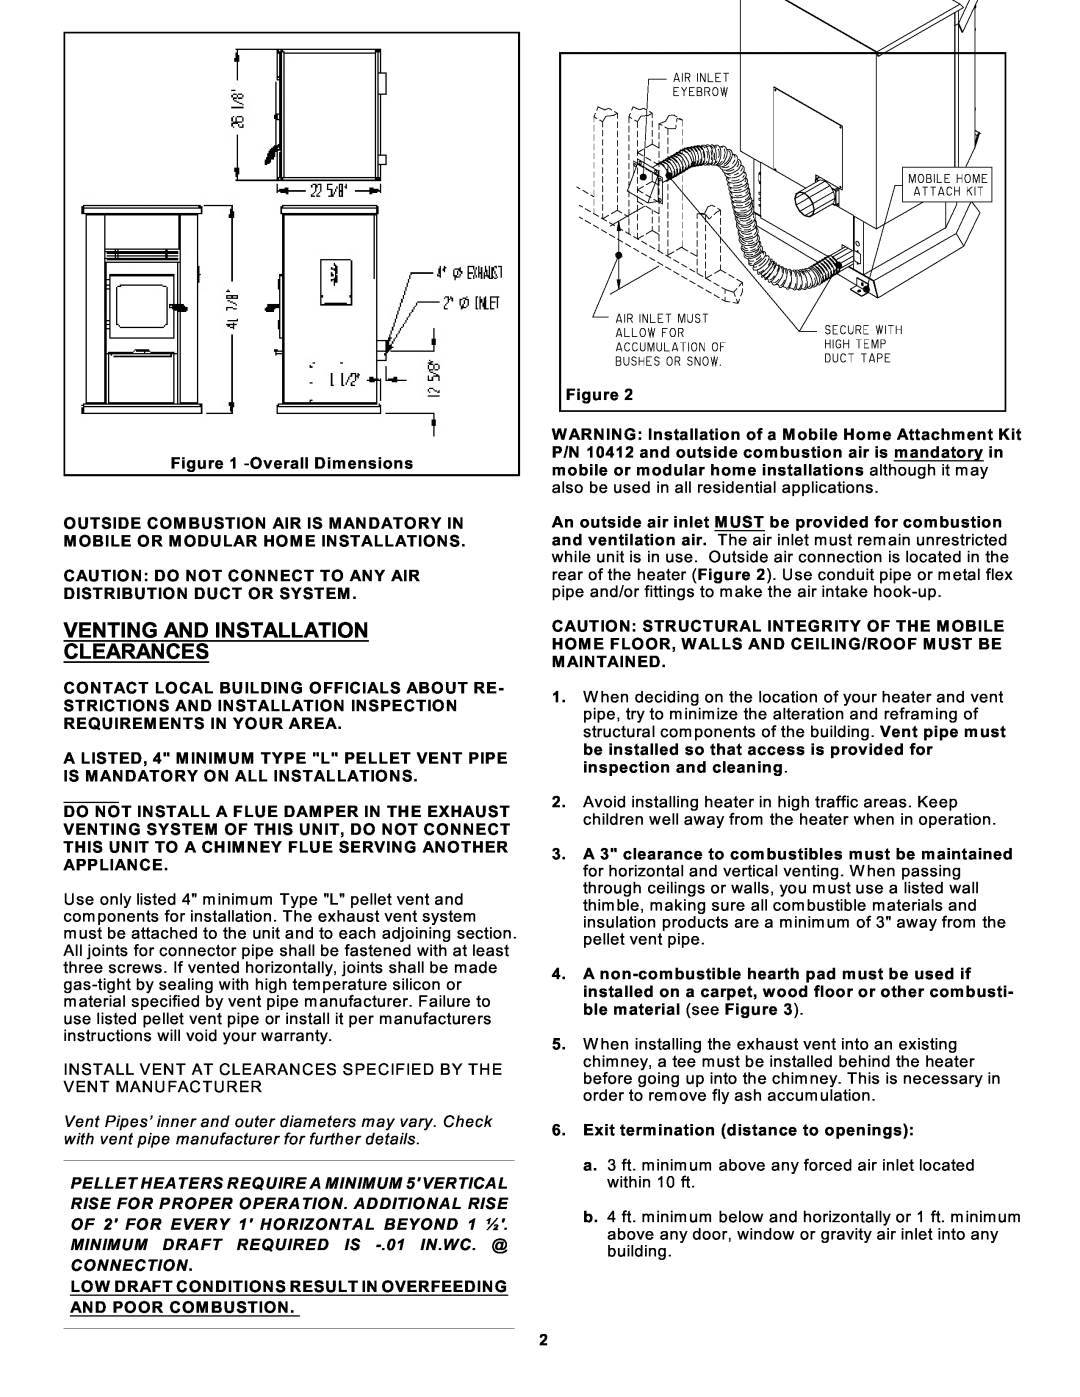 Sierra Products EF5001U owner manual Venting And Installation Clearances, Connection 